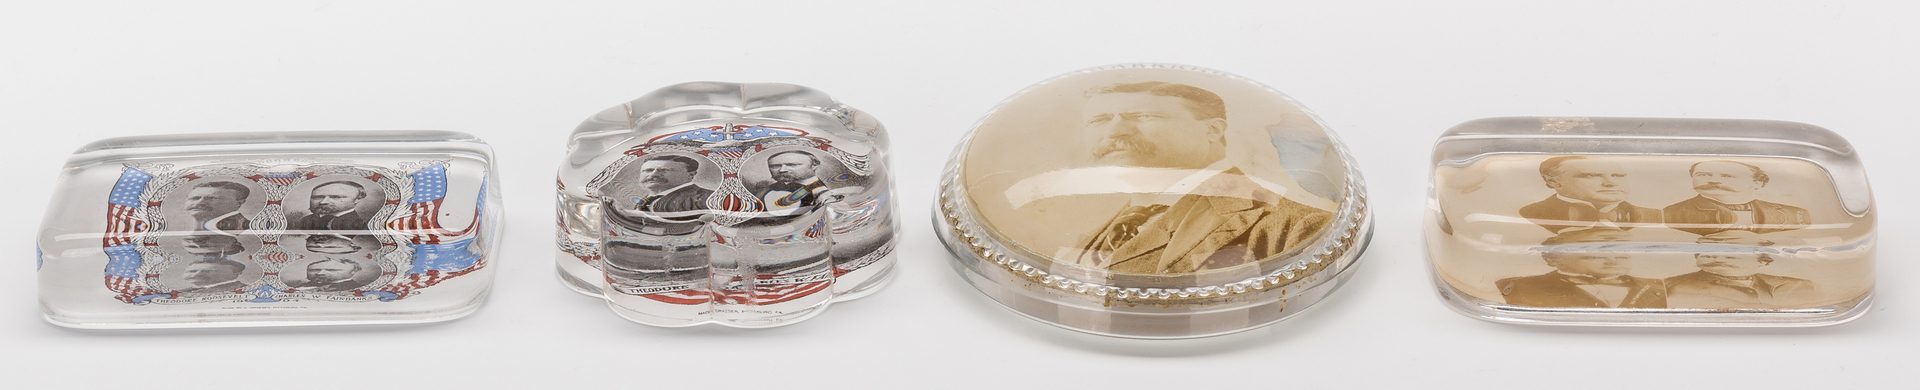 Lot 283: 6 Campaign Collectibles, 2 Trays & 4 Paperweights